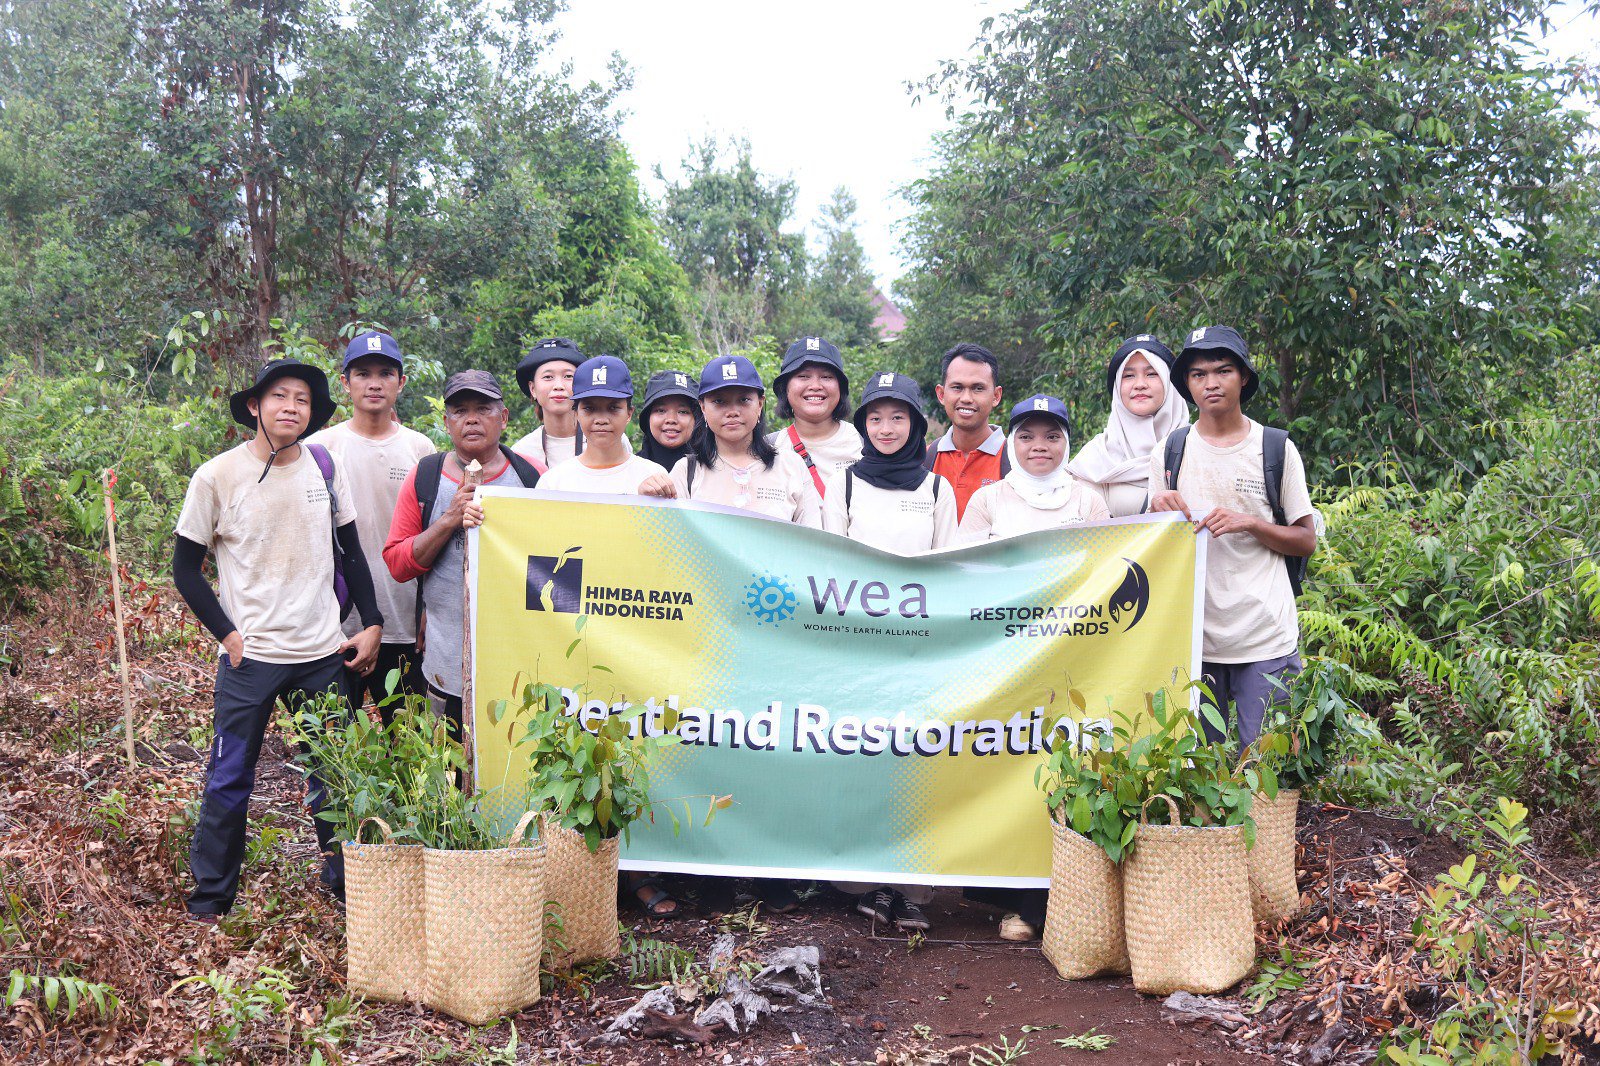 Volunteers in Central Kalimantan, Indonesia helped restore degraded peatland forests in a collaborative event with WEA and the Himba Raya Indonesia Foundation (HIRAI). (Credit: Women's Earth Alliance)